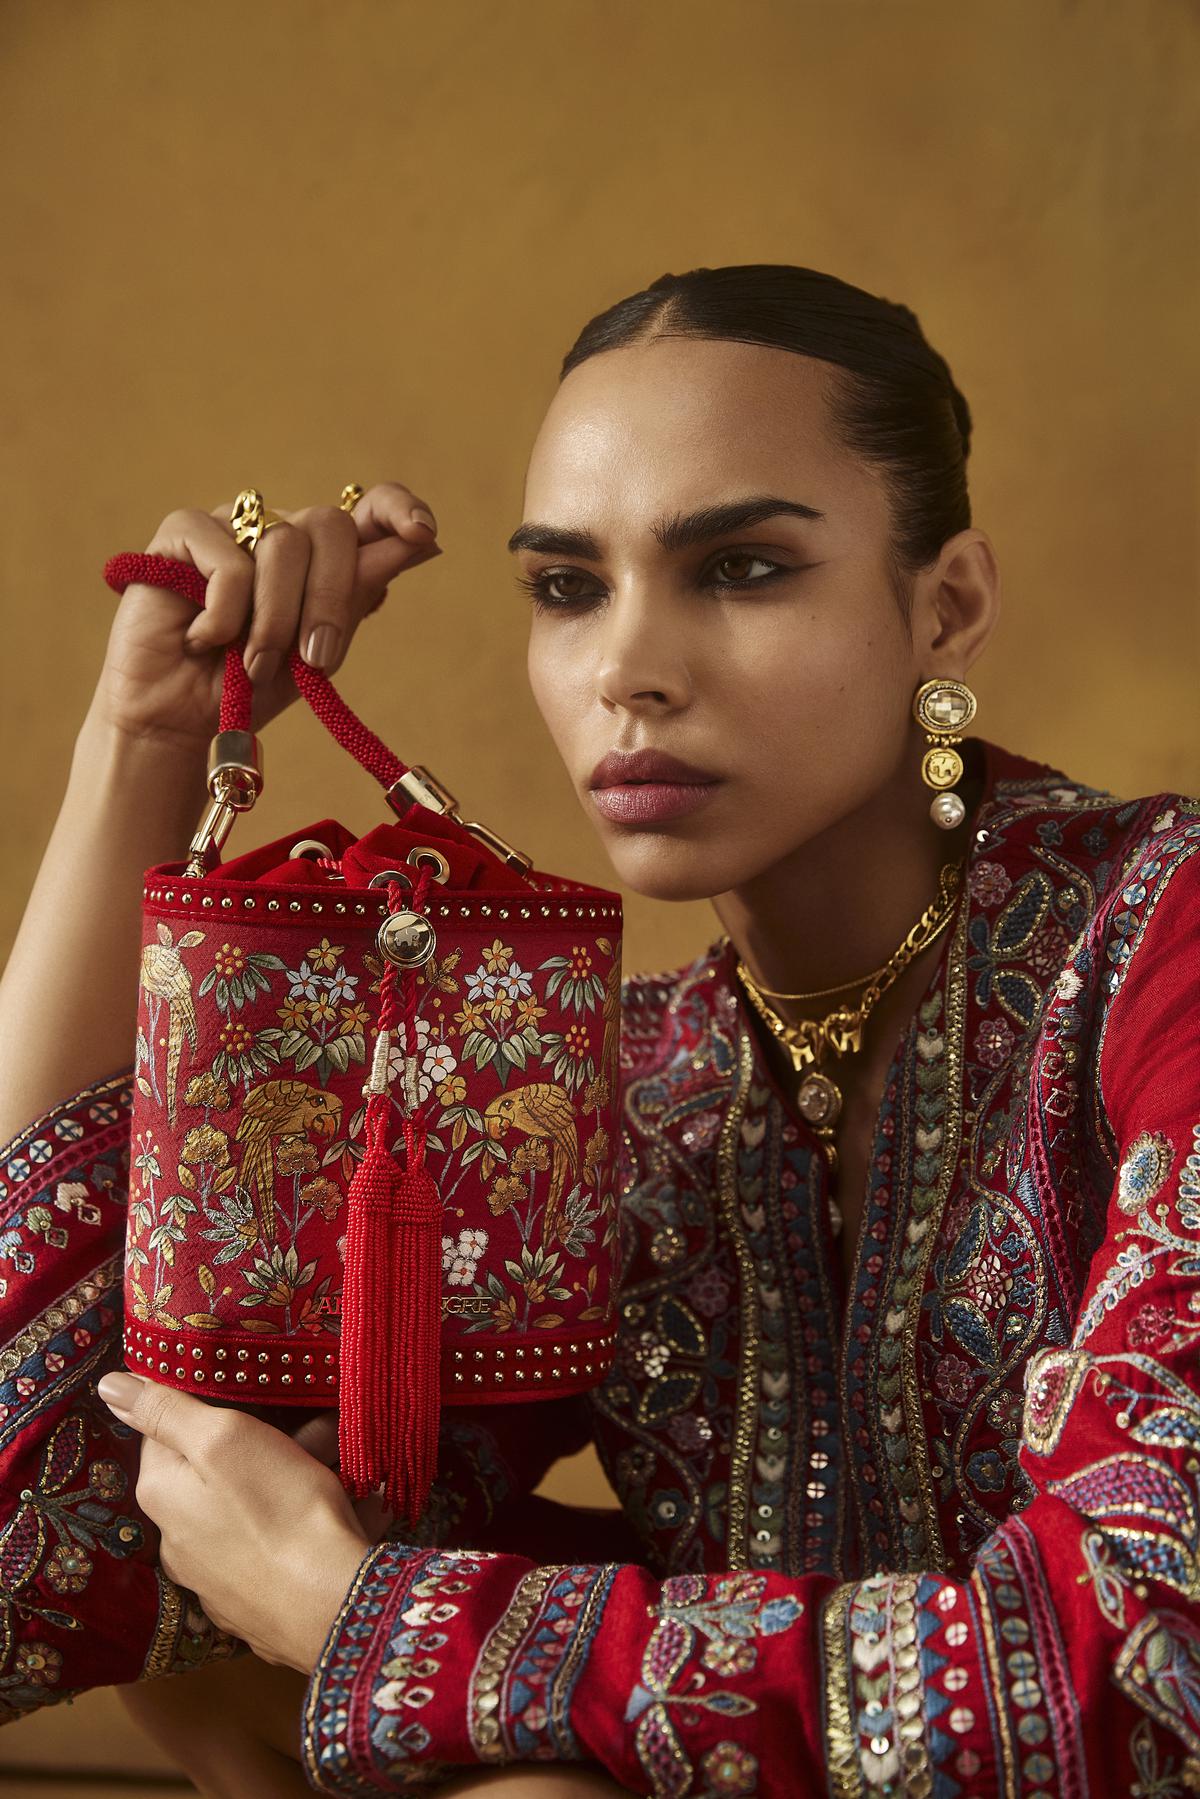 Anita Dongre’s second edition of vegan accessories is made with Mirum — the world’s first plastic-free alternative to leather